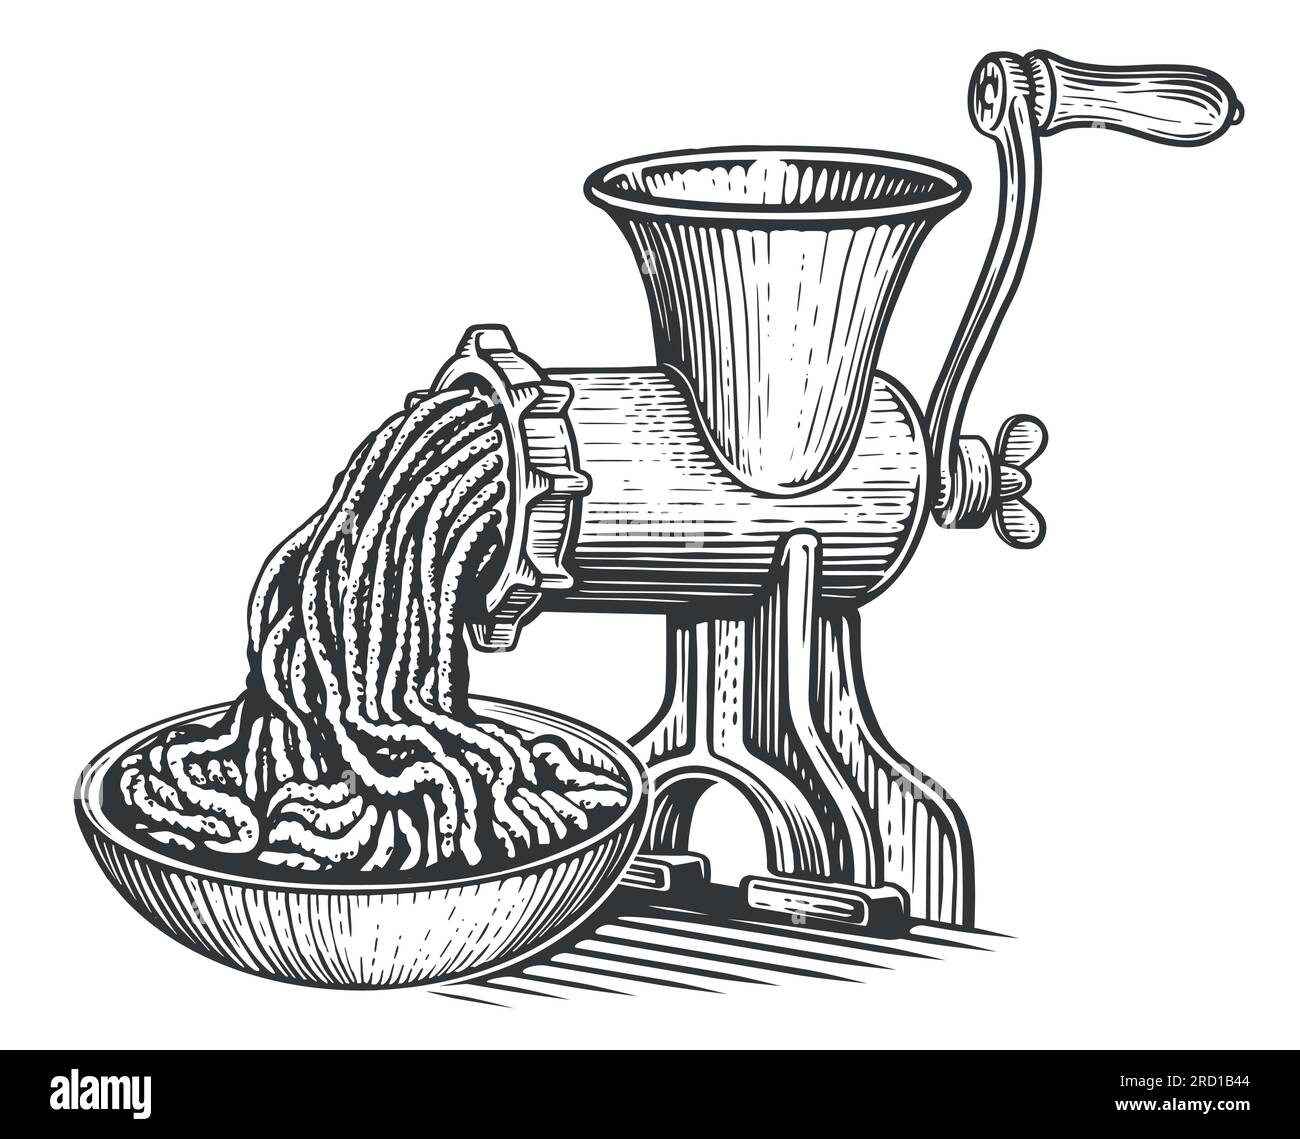 Vintage meat grinder. Retro mincer and mince. Cooking concept. Sketch vector illustration engraving style Stock Vector